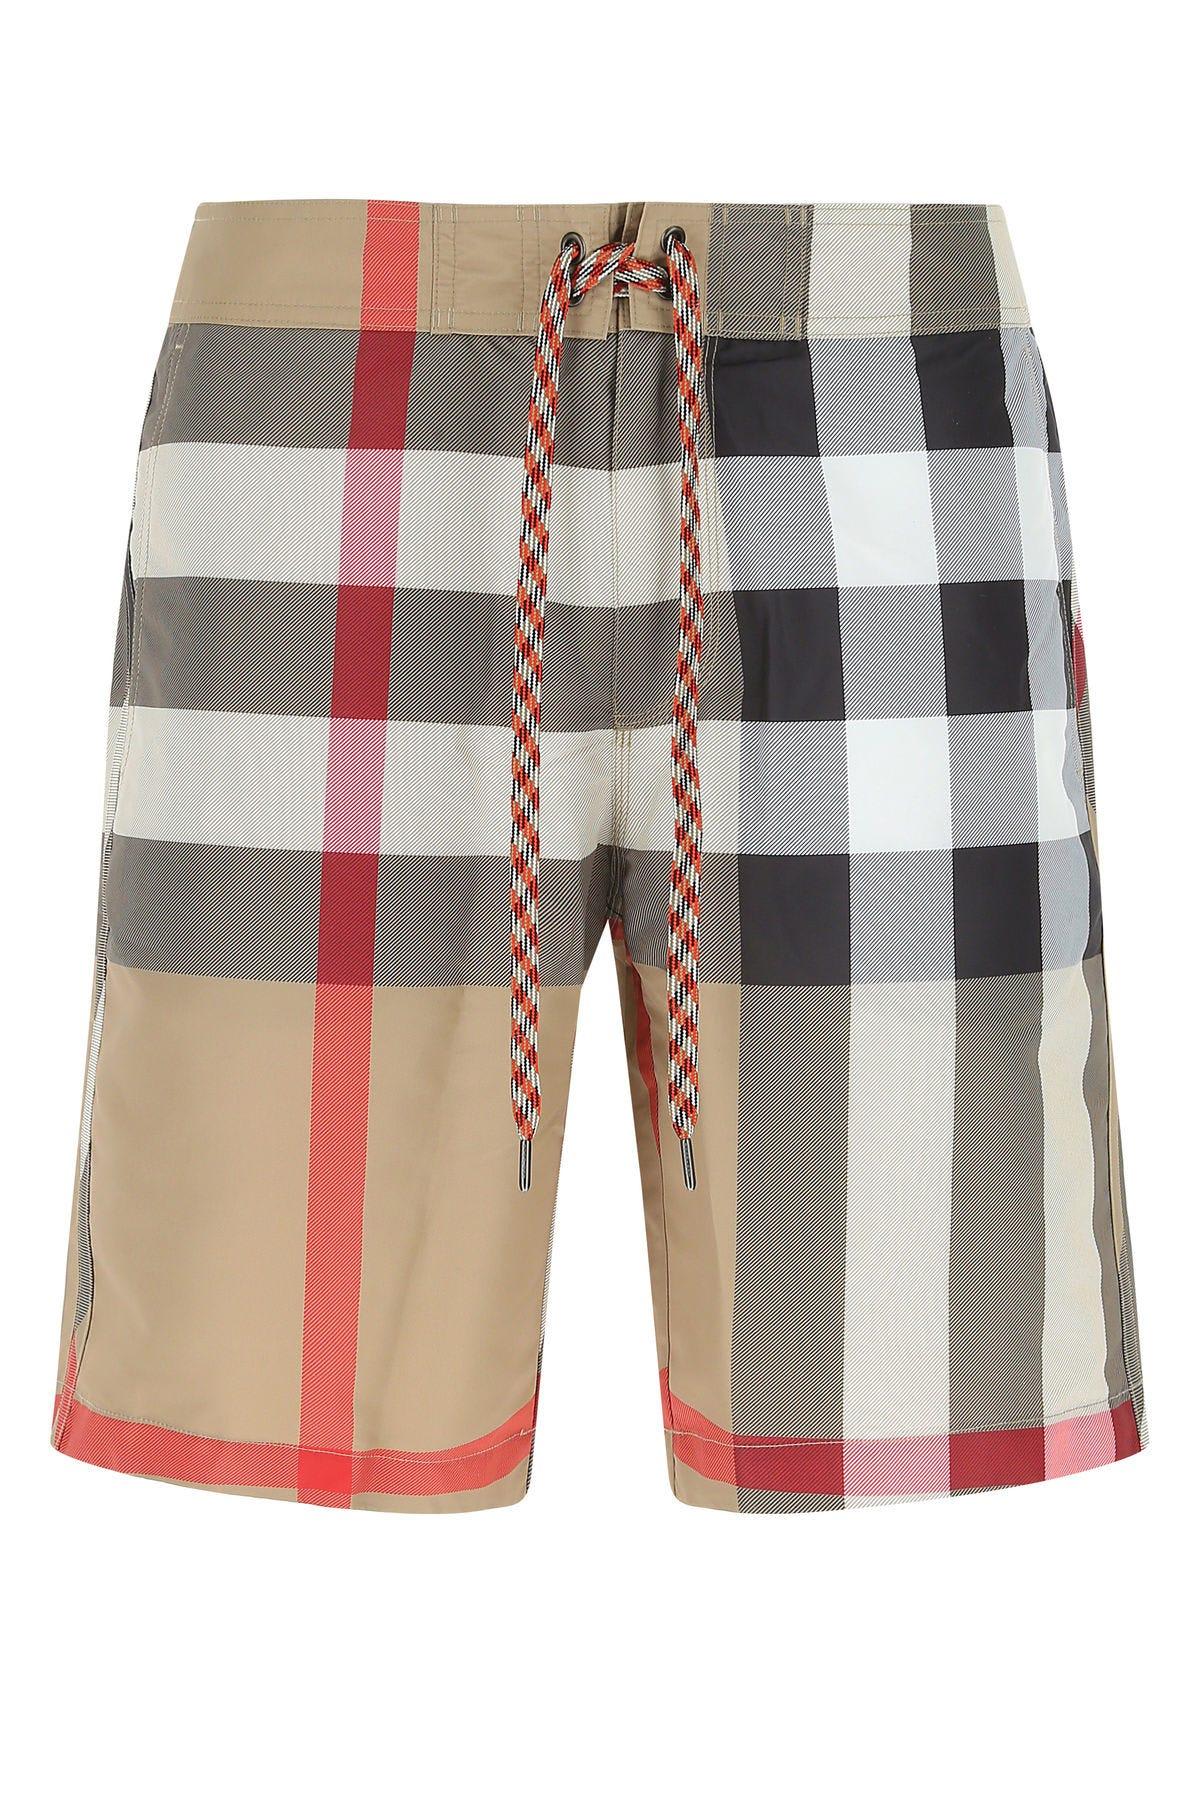 Burberry Printed Polyester Swimming Shorts